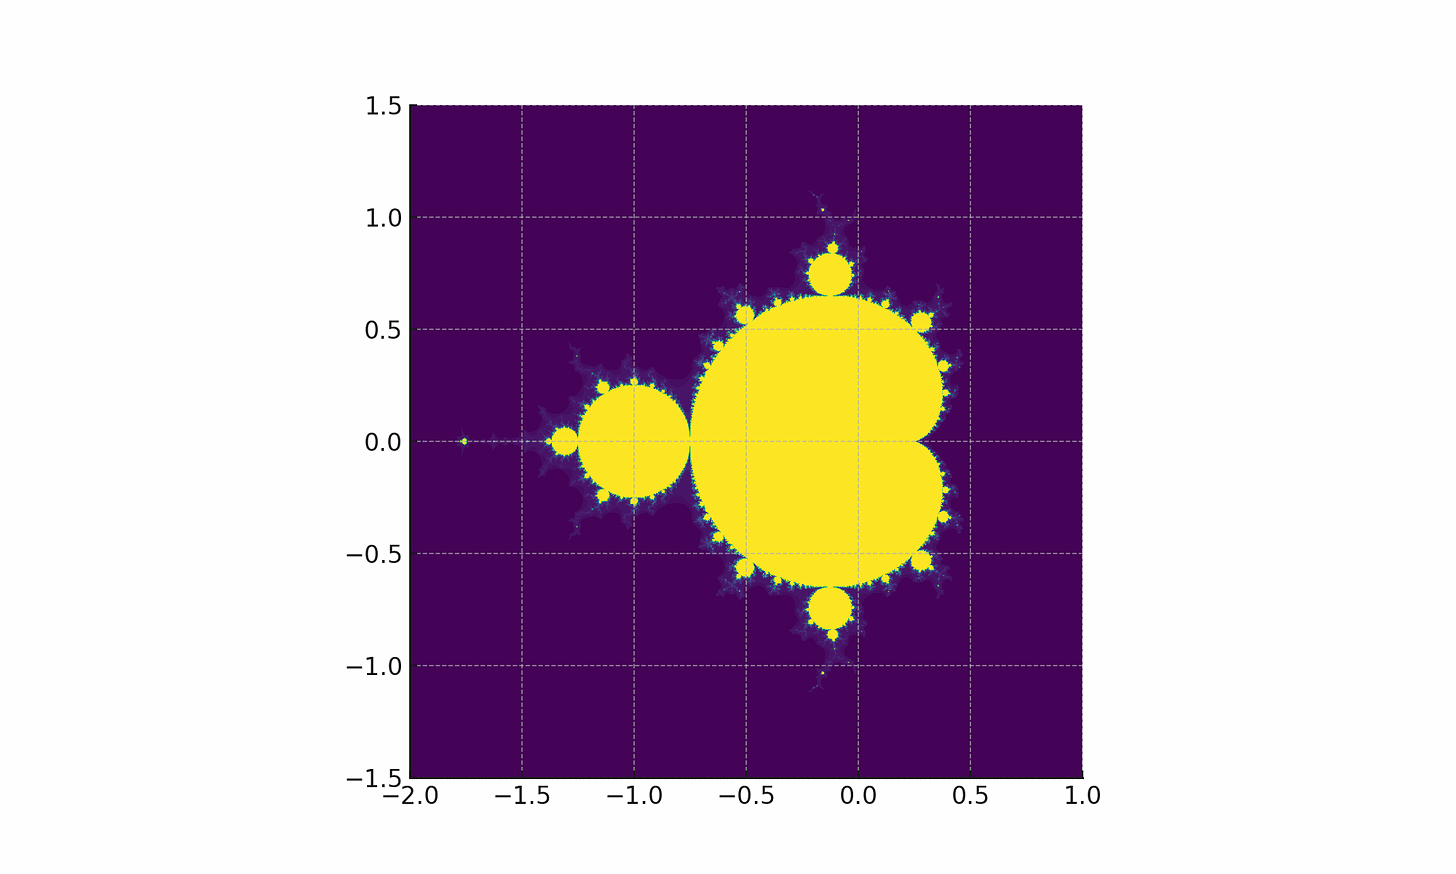 An image of a mandelbrot fractal, yellow against a purple background. The axis show the co-ordinates from -1.5 to 1.5 and -2 to 1.0